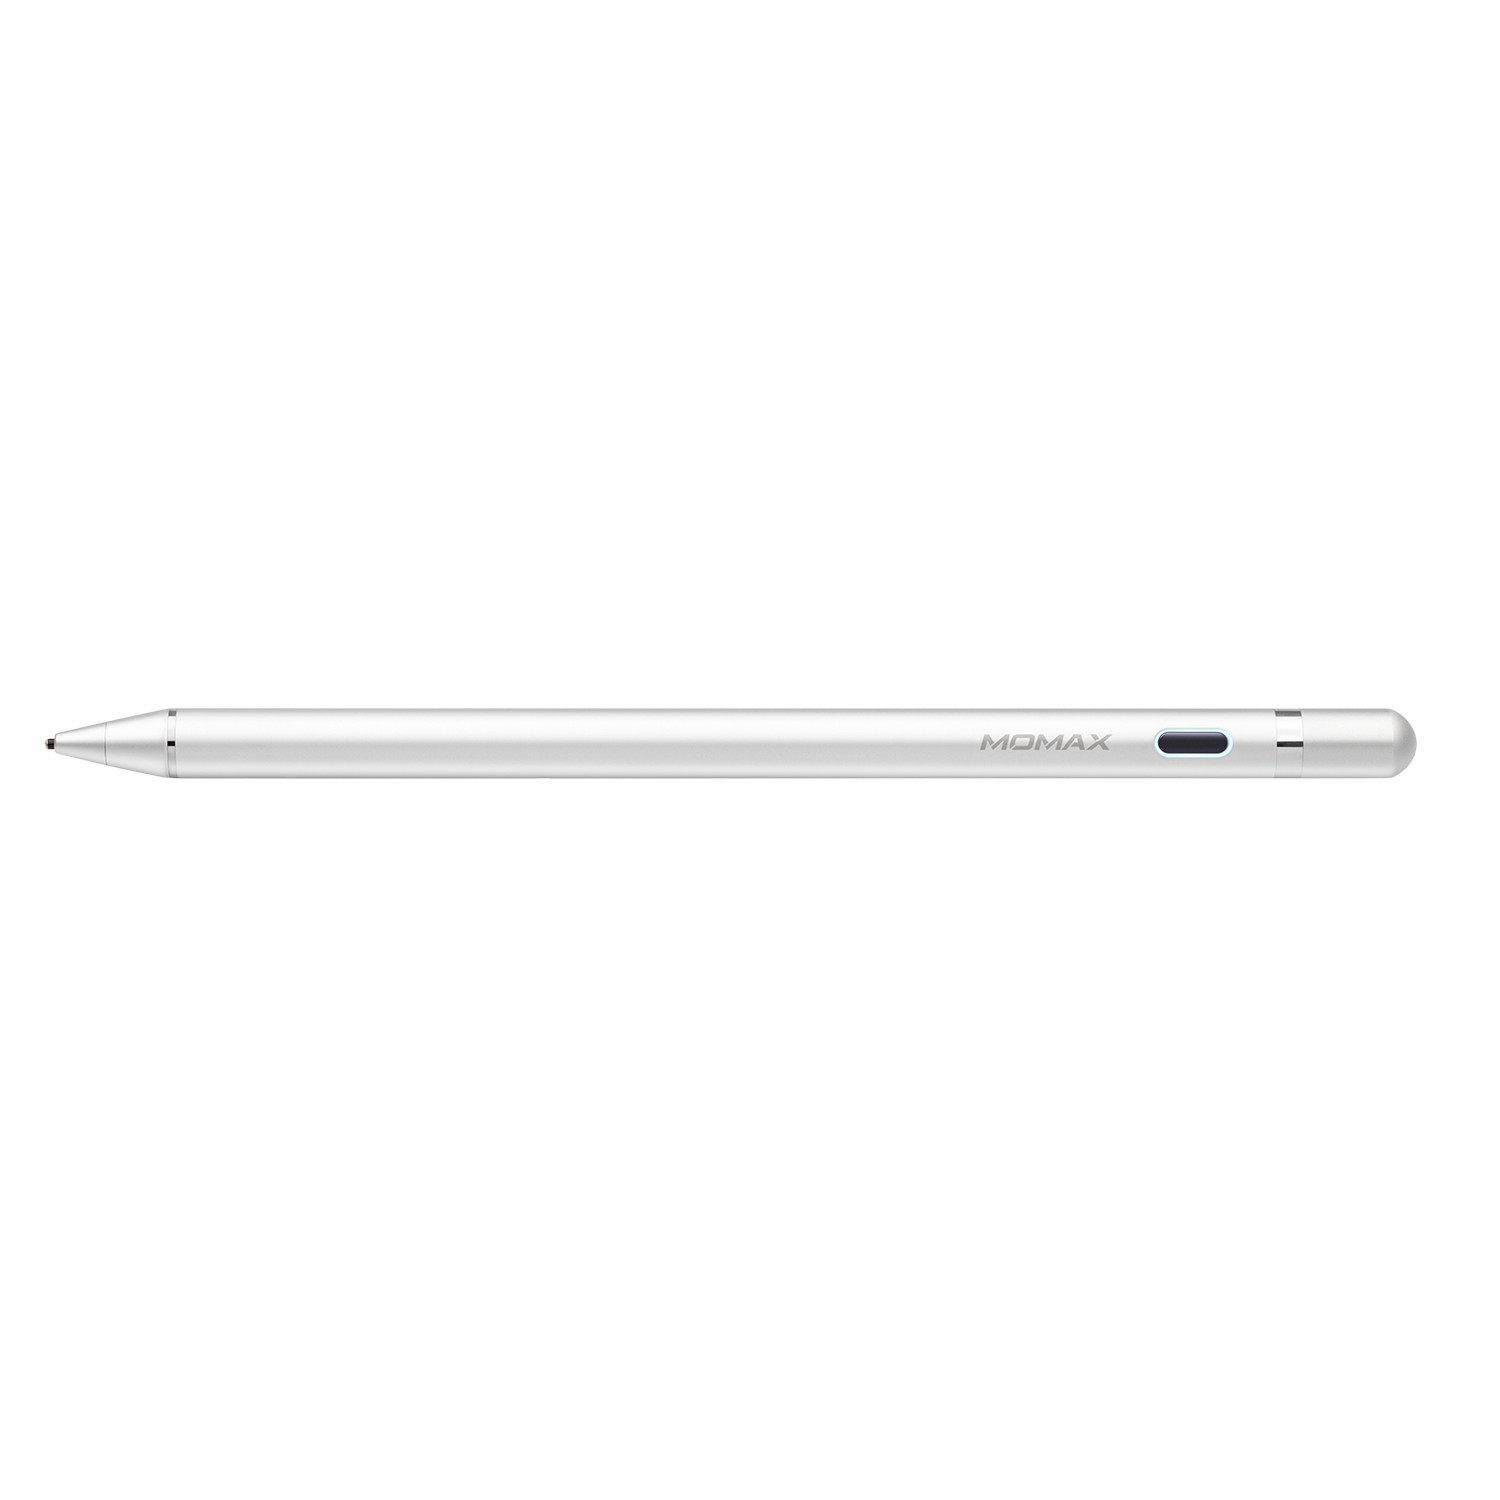 Momax One Link Active Stylus Pen